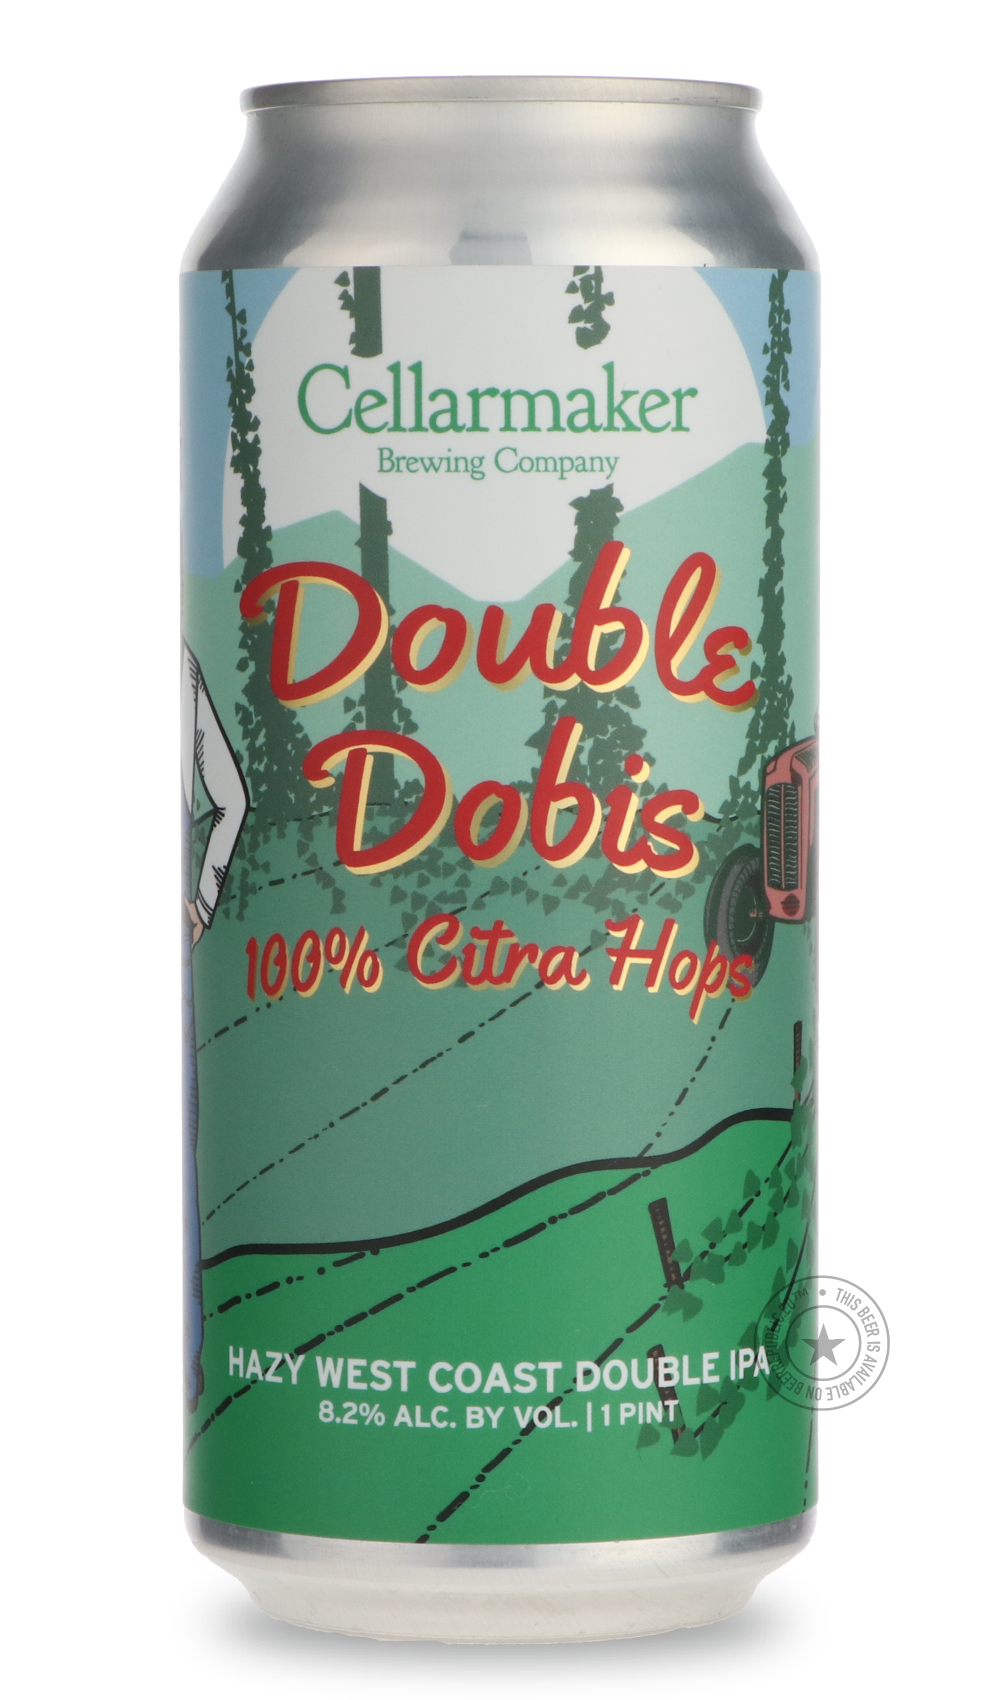 -Cellarmaker- Double Dobis-IPA- Only @ Beer Republic - The best online beer store for American & Canadian craft beer - Buy beer online from the USA and Canada - Bier online kopen - Amerikaans bier kopen - Craft beer store - Craft beer kopen - Amerikanisch bier kaufen - Bier online kaufen - Acheter biere online - IPA - Stout - Porter - New England IPA - Hazy IPA - Imperial Stout - Barrel Aged - Barrel Aged Imperial Stout - Brown - Dark beer - Blond - Blonde - Pilsner - Lager - Wheat - Weizen - Amber - Barley